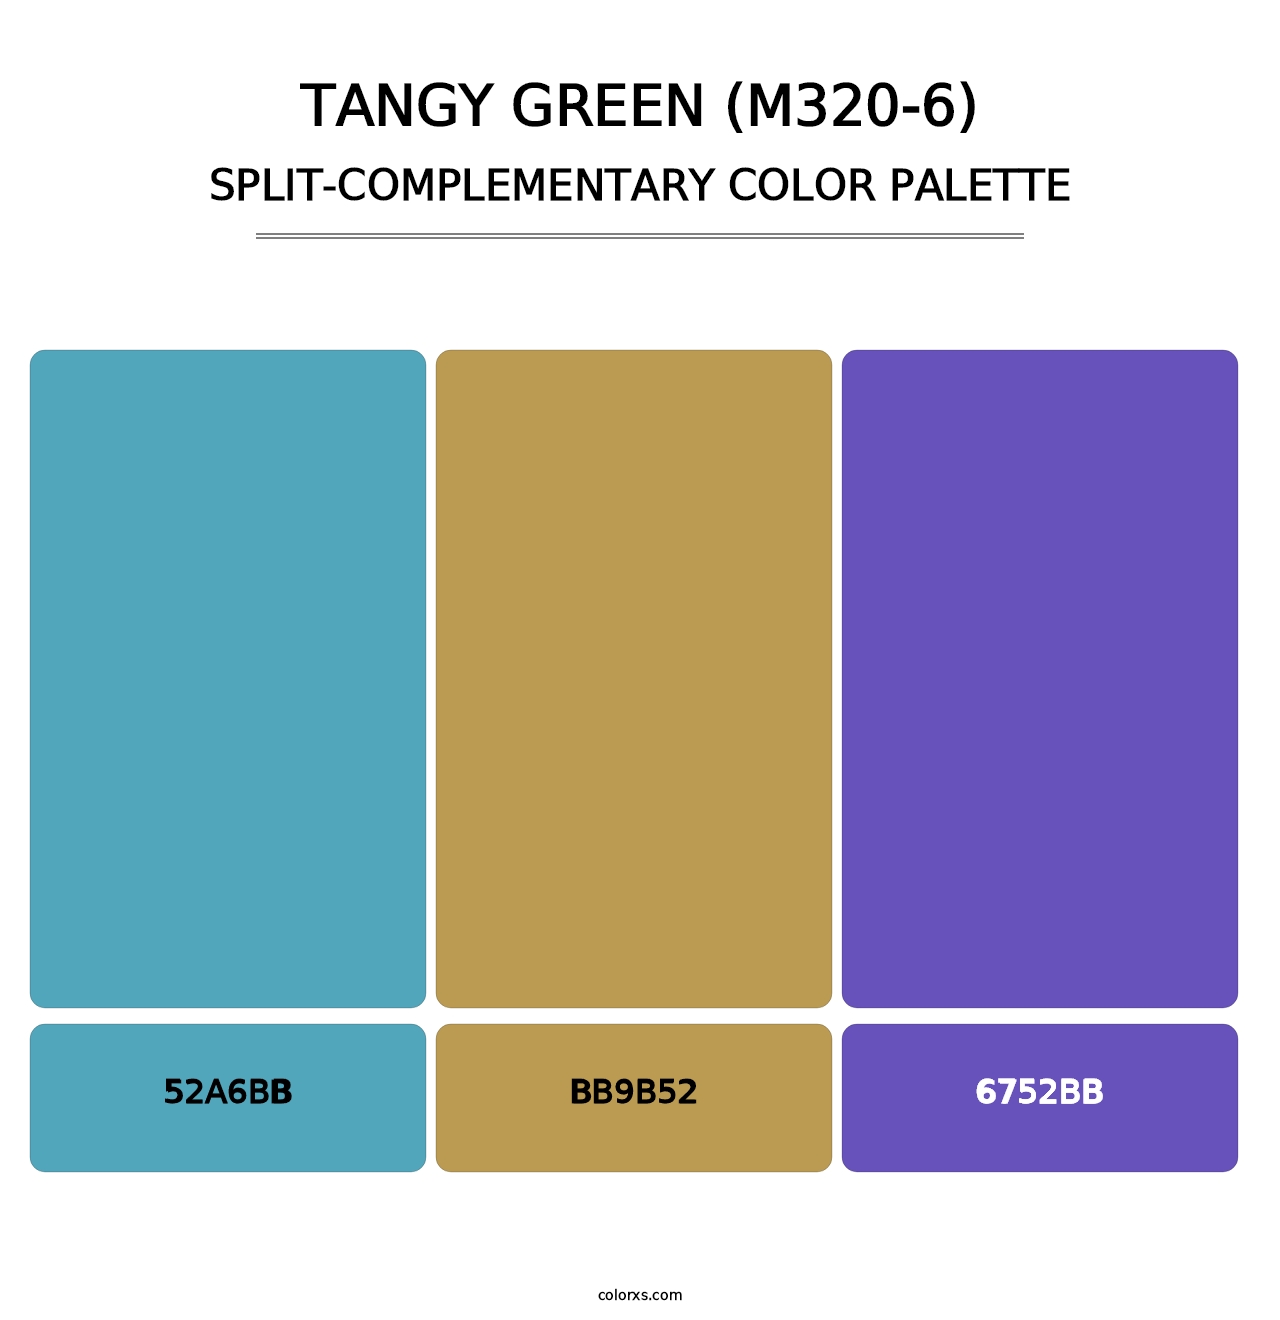 Tangy Green (M320-6) - Split-Complementary Color Palette